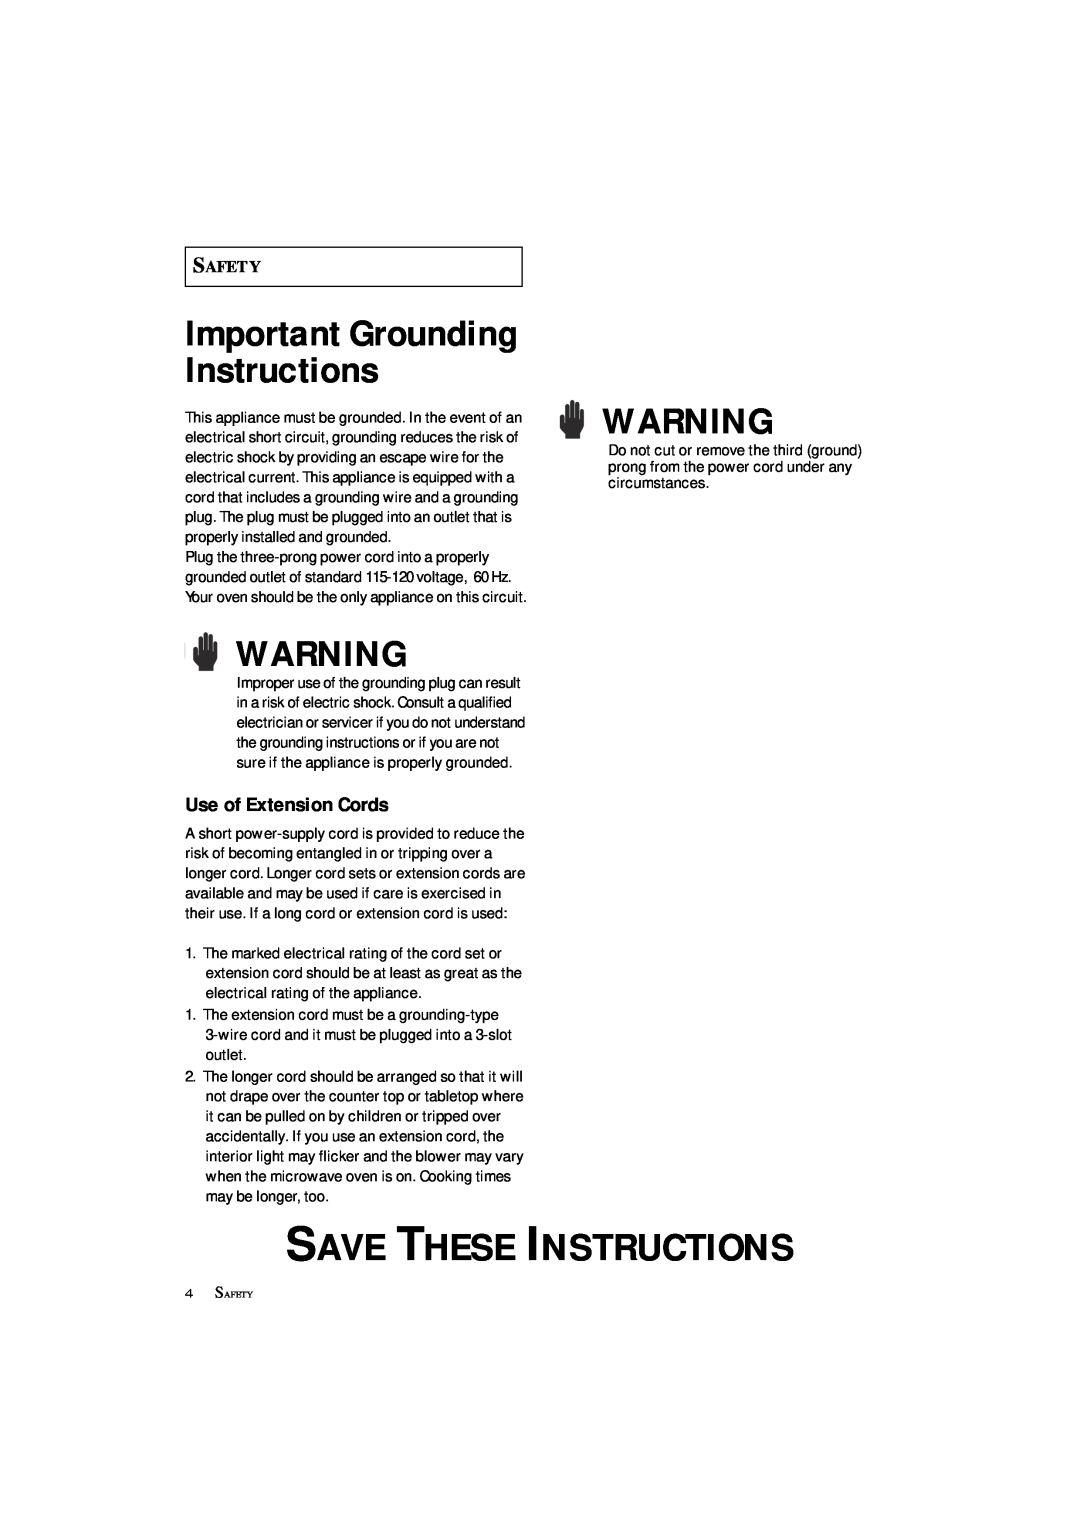 Samsung MS8899S manual Use of Extension Cords, Save These Instructions, Important Grounding Instructions, Safety 